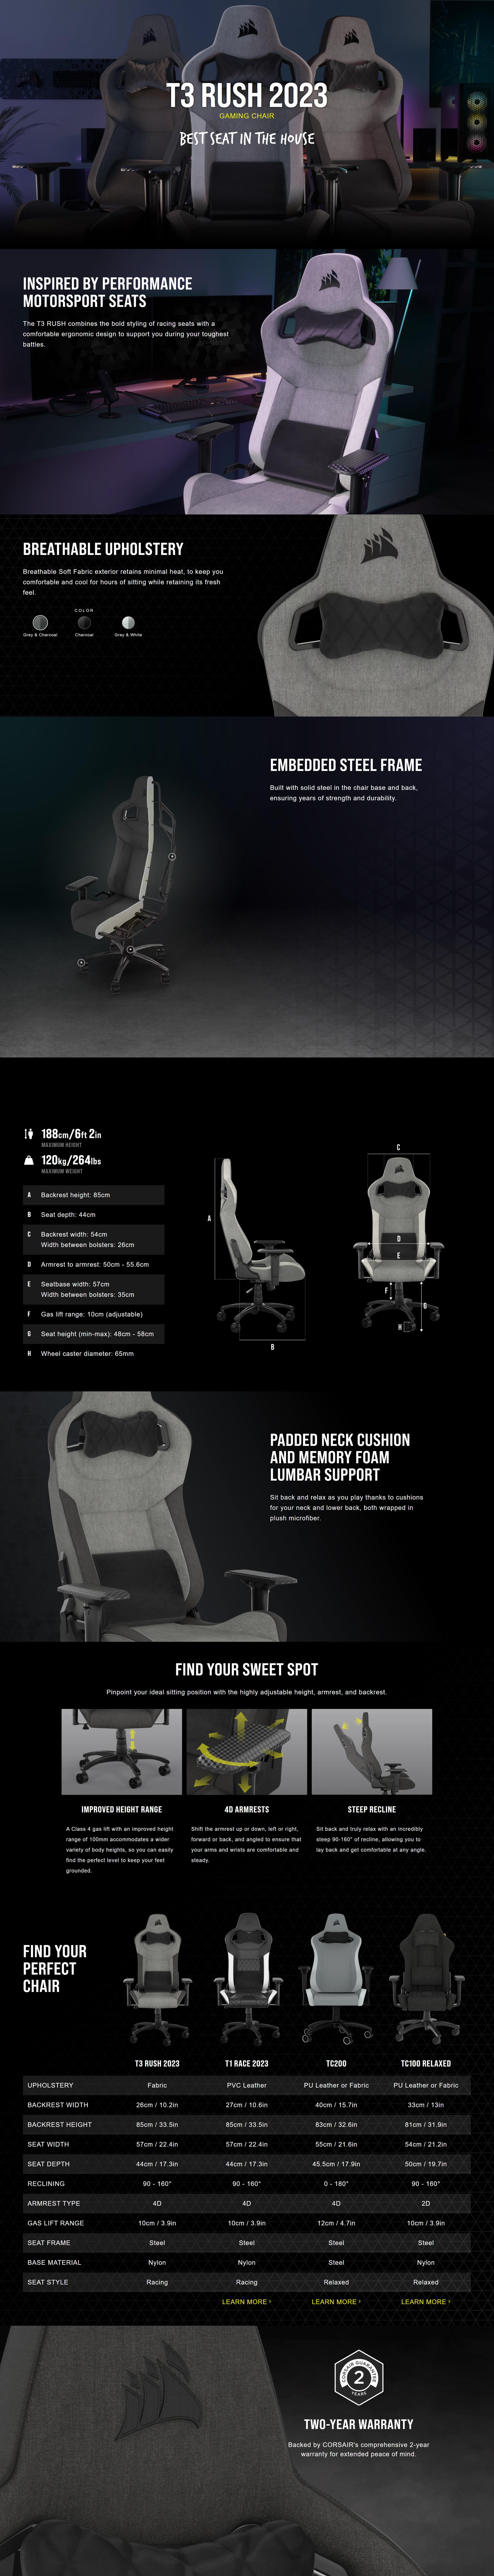 A large marketing image providing additional information about the product Corsair T3 RUSH Gaming Chair (2023) - Gray/Charcoal - Additional alt info not provided